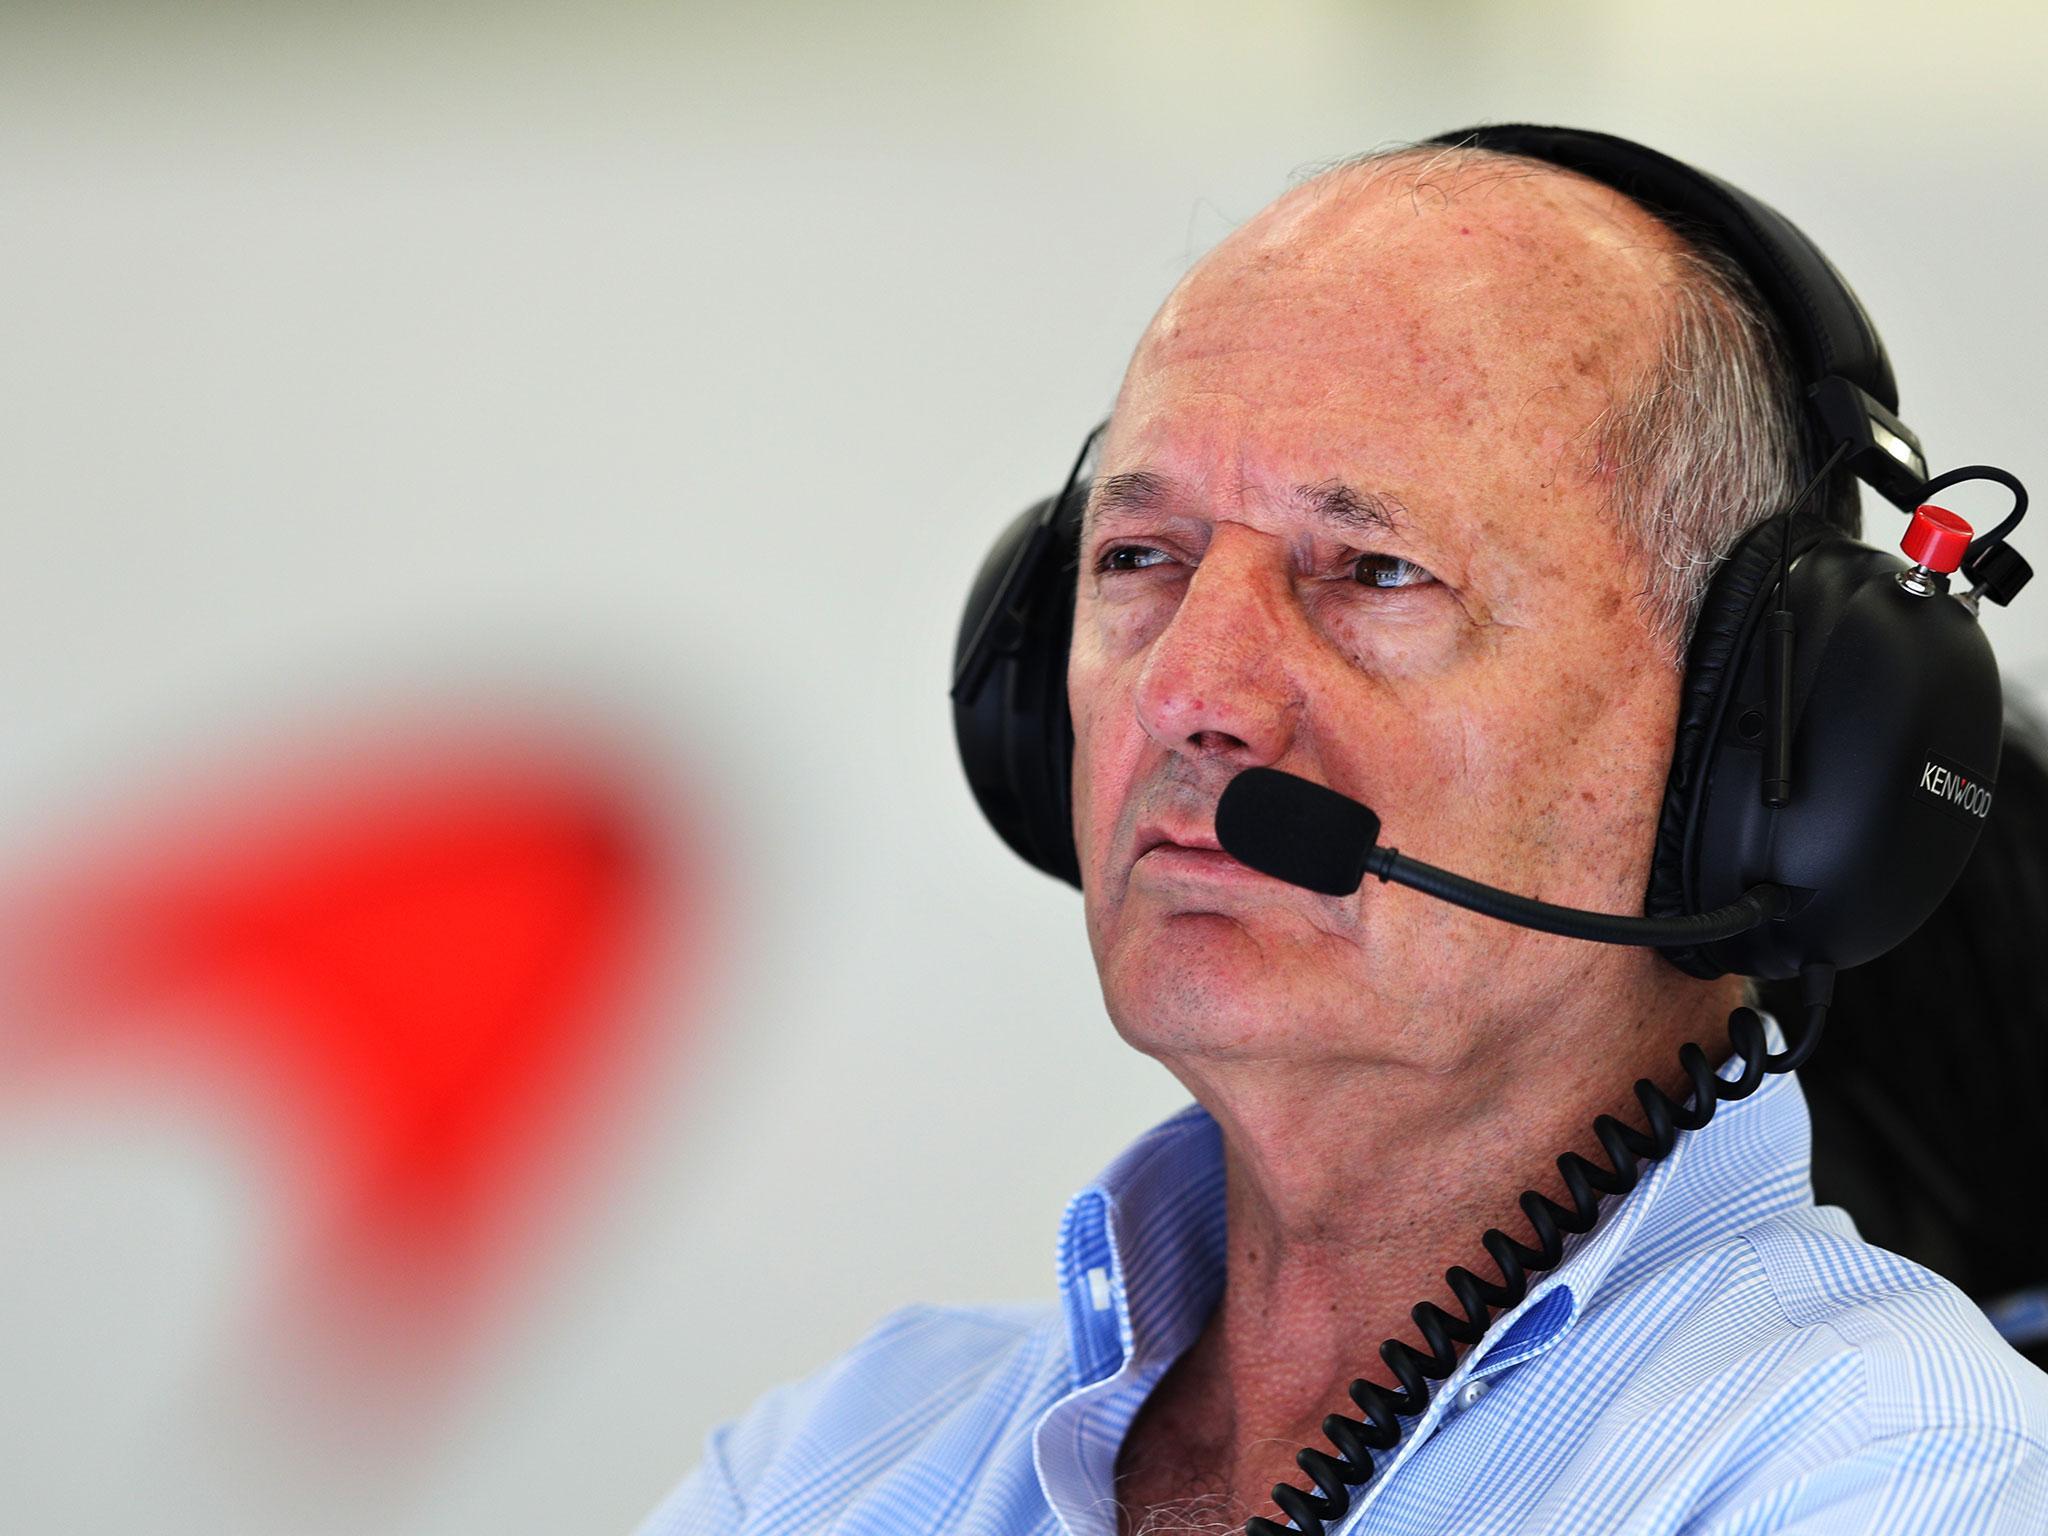 The sale of Ron Dennis' stake leaves McLaren in a very strong position